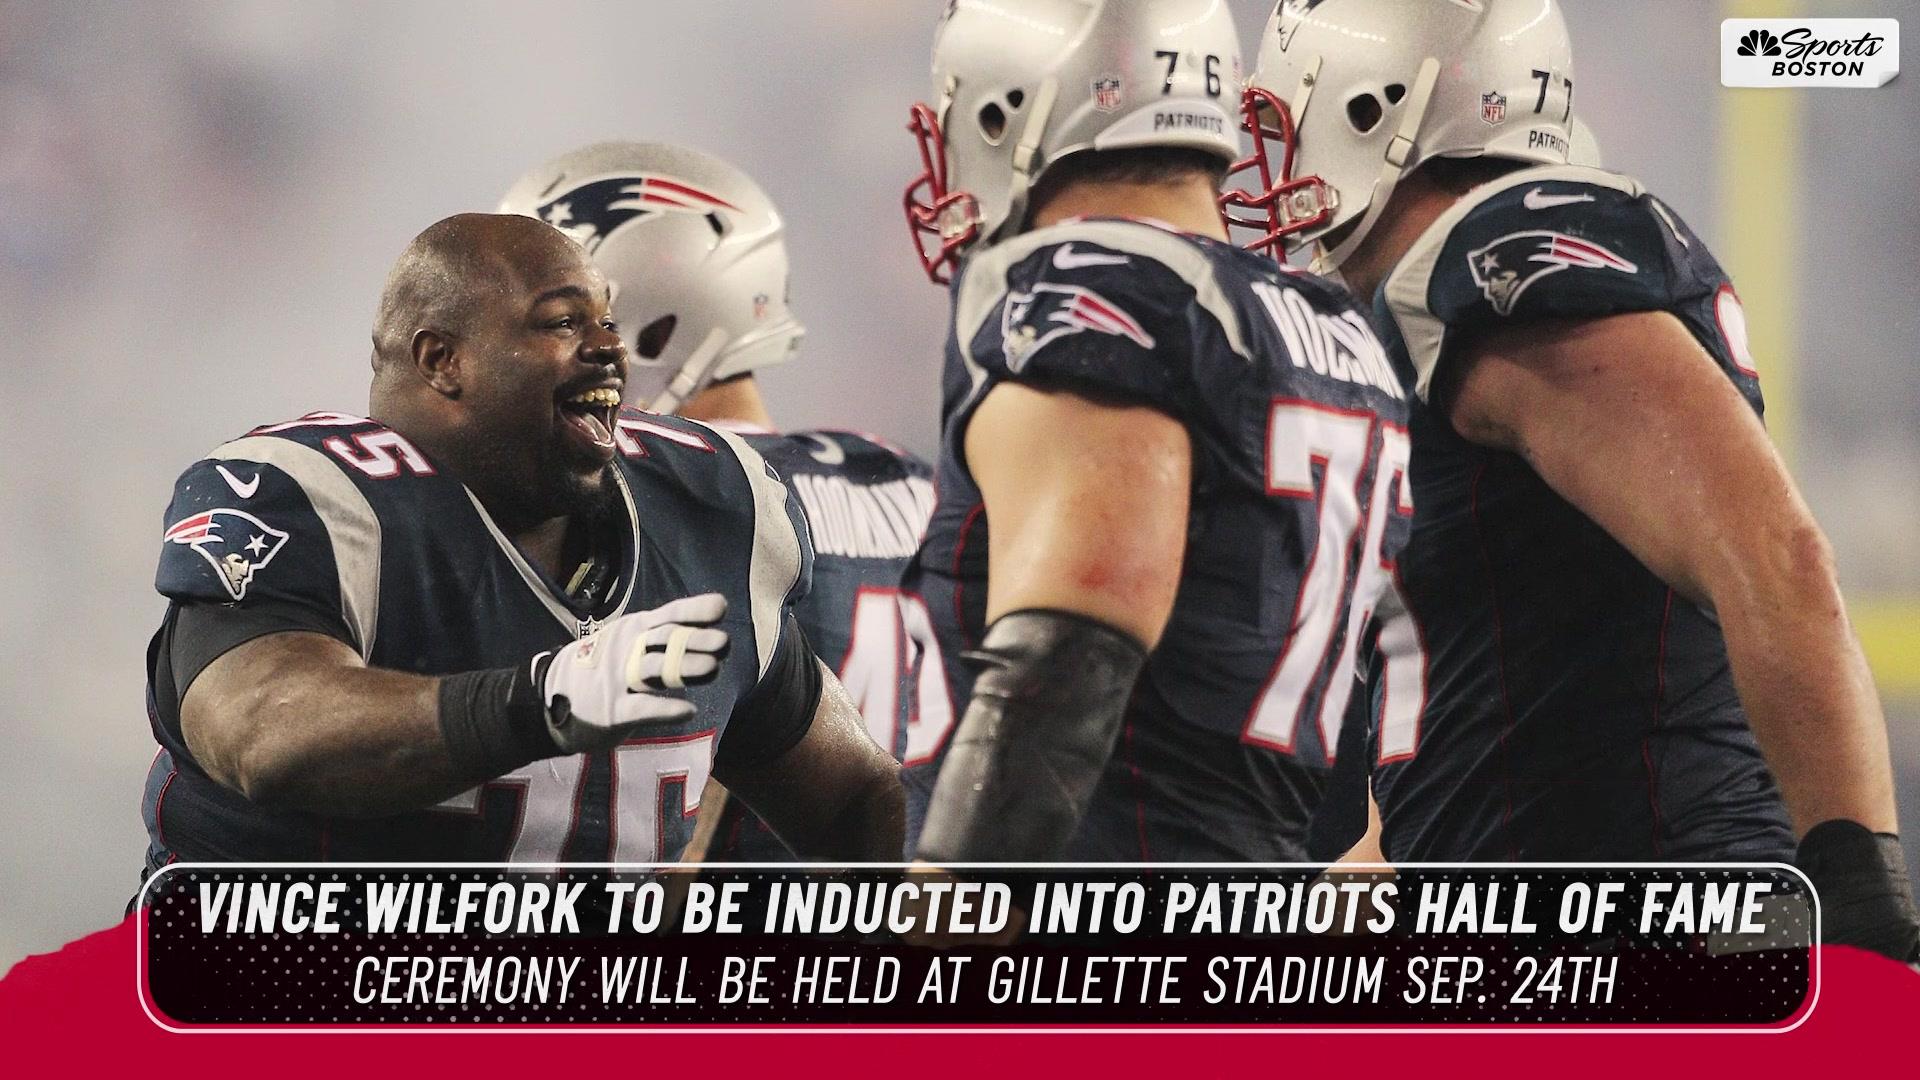 Watch: Vince Wilfork gets inducted into Patriots Hall of Fame